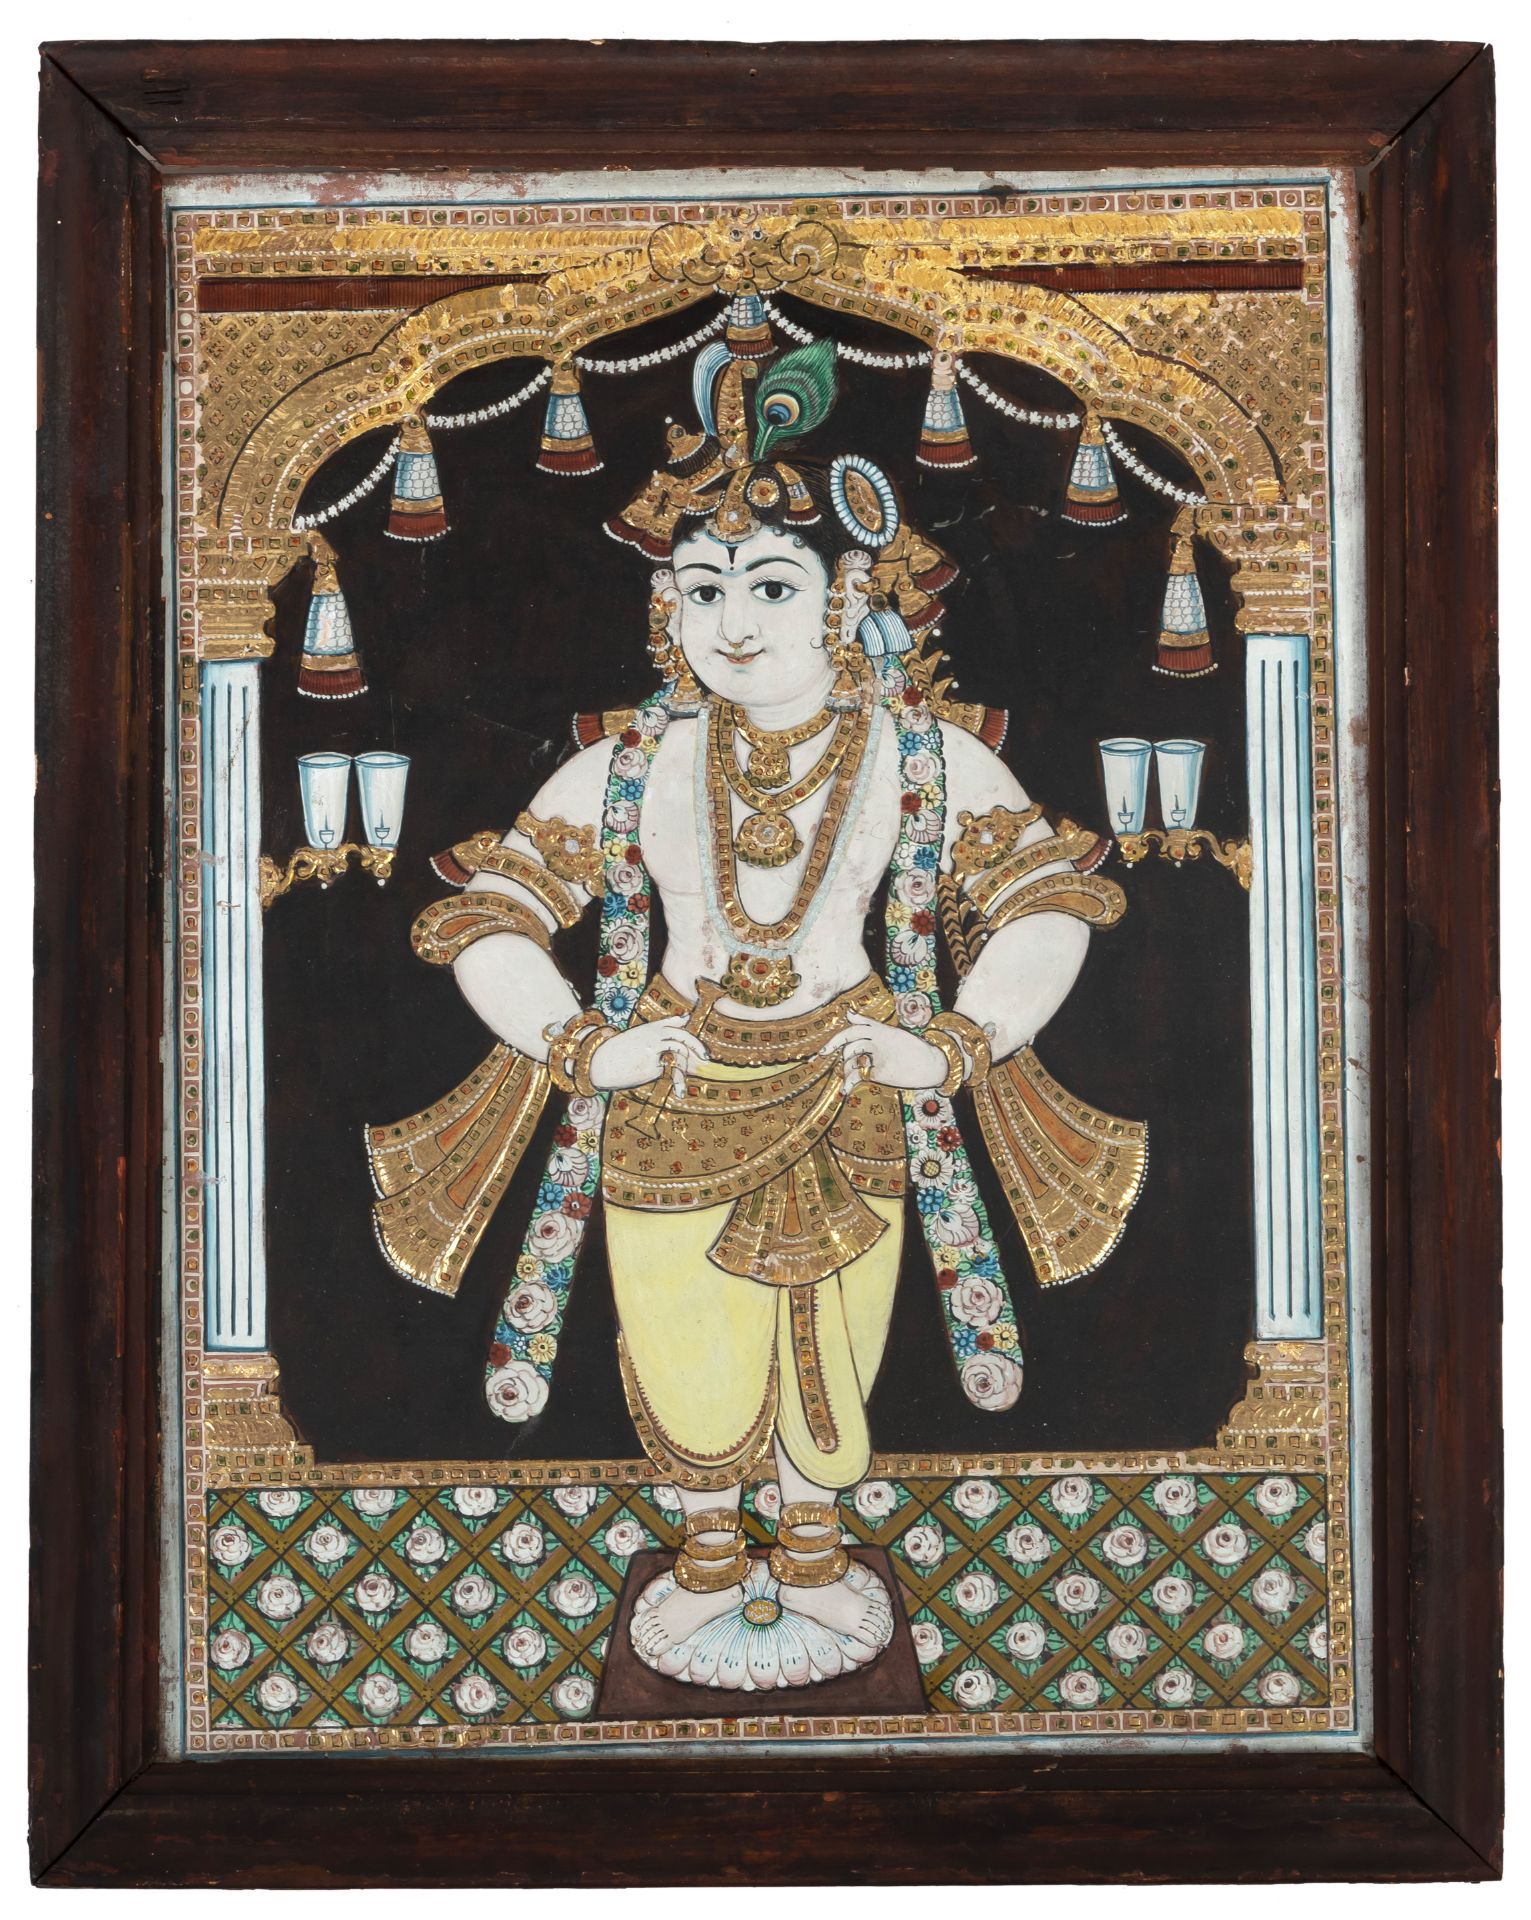 FOUR POLYHCROME PAINTINGS ON WOOD AND A REVERSE GLASS PAINTING DEPICTING KRISHNA, SHIVA, AND DURGA - Image 5 of 5